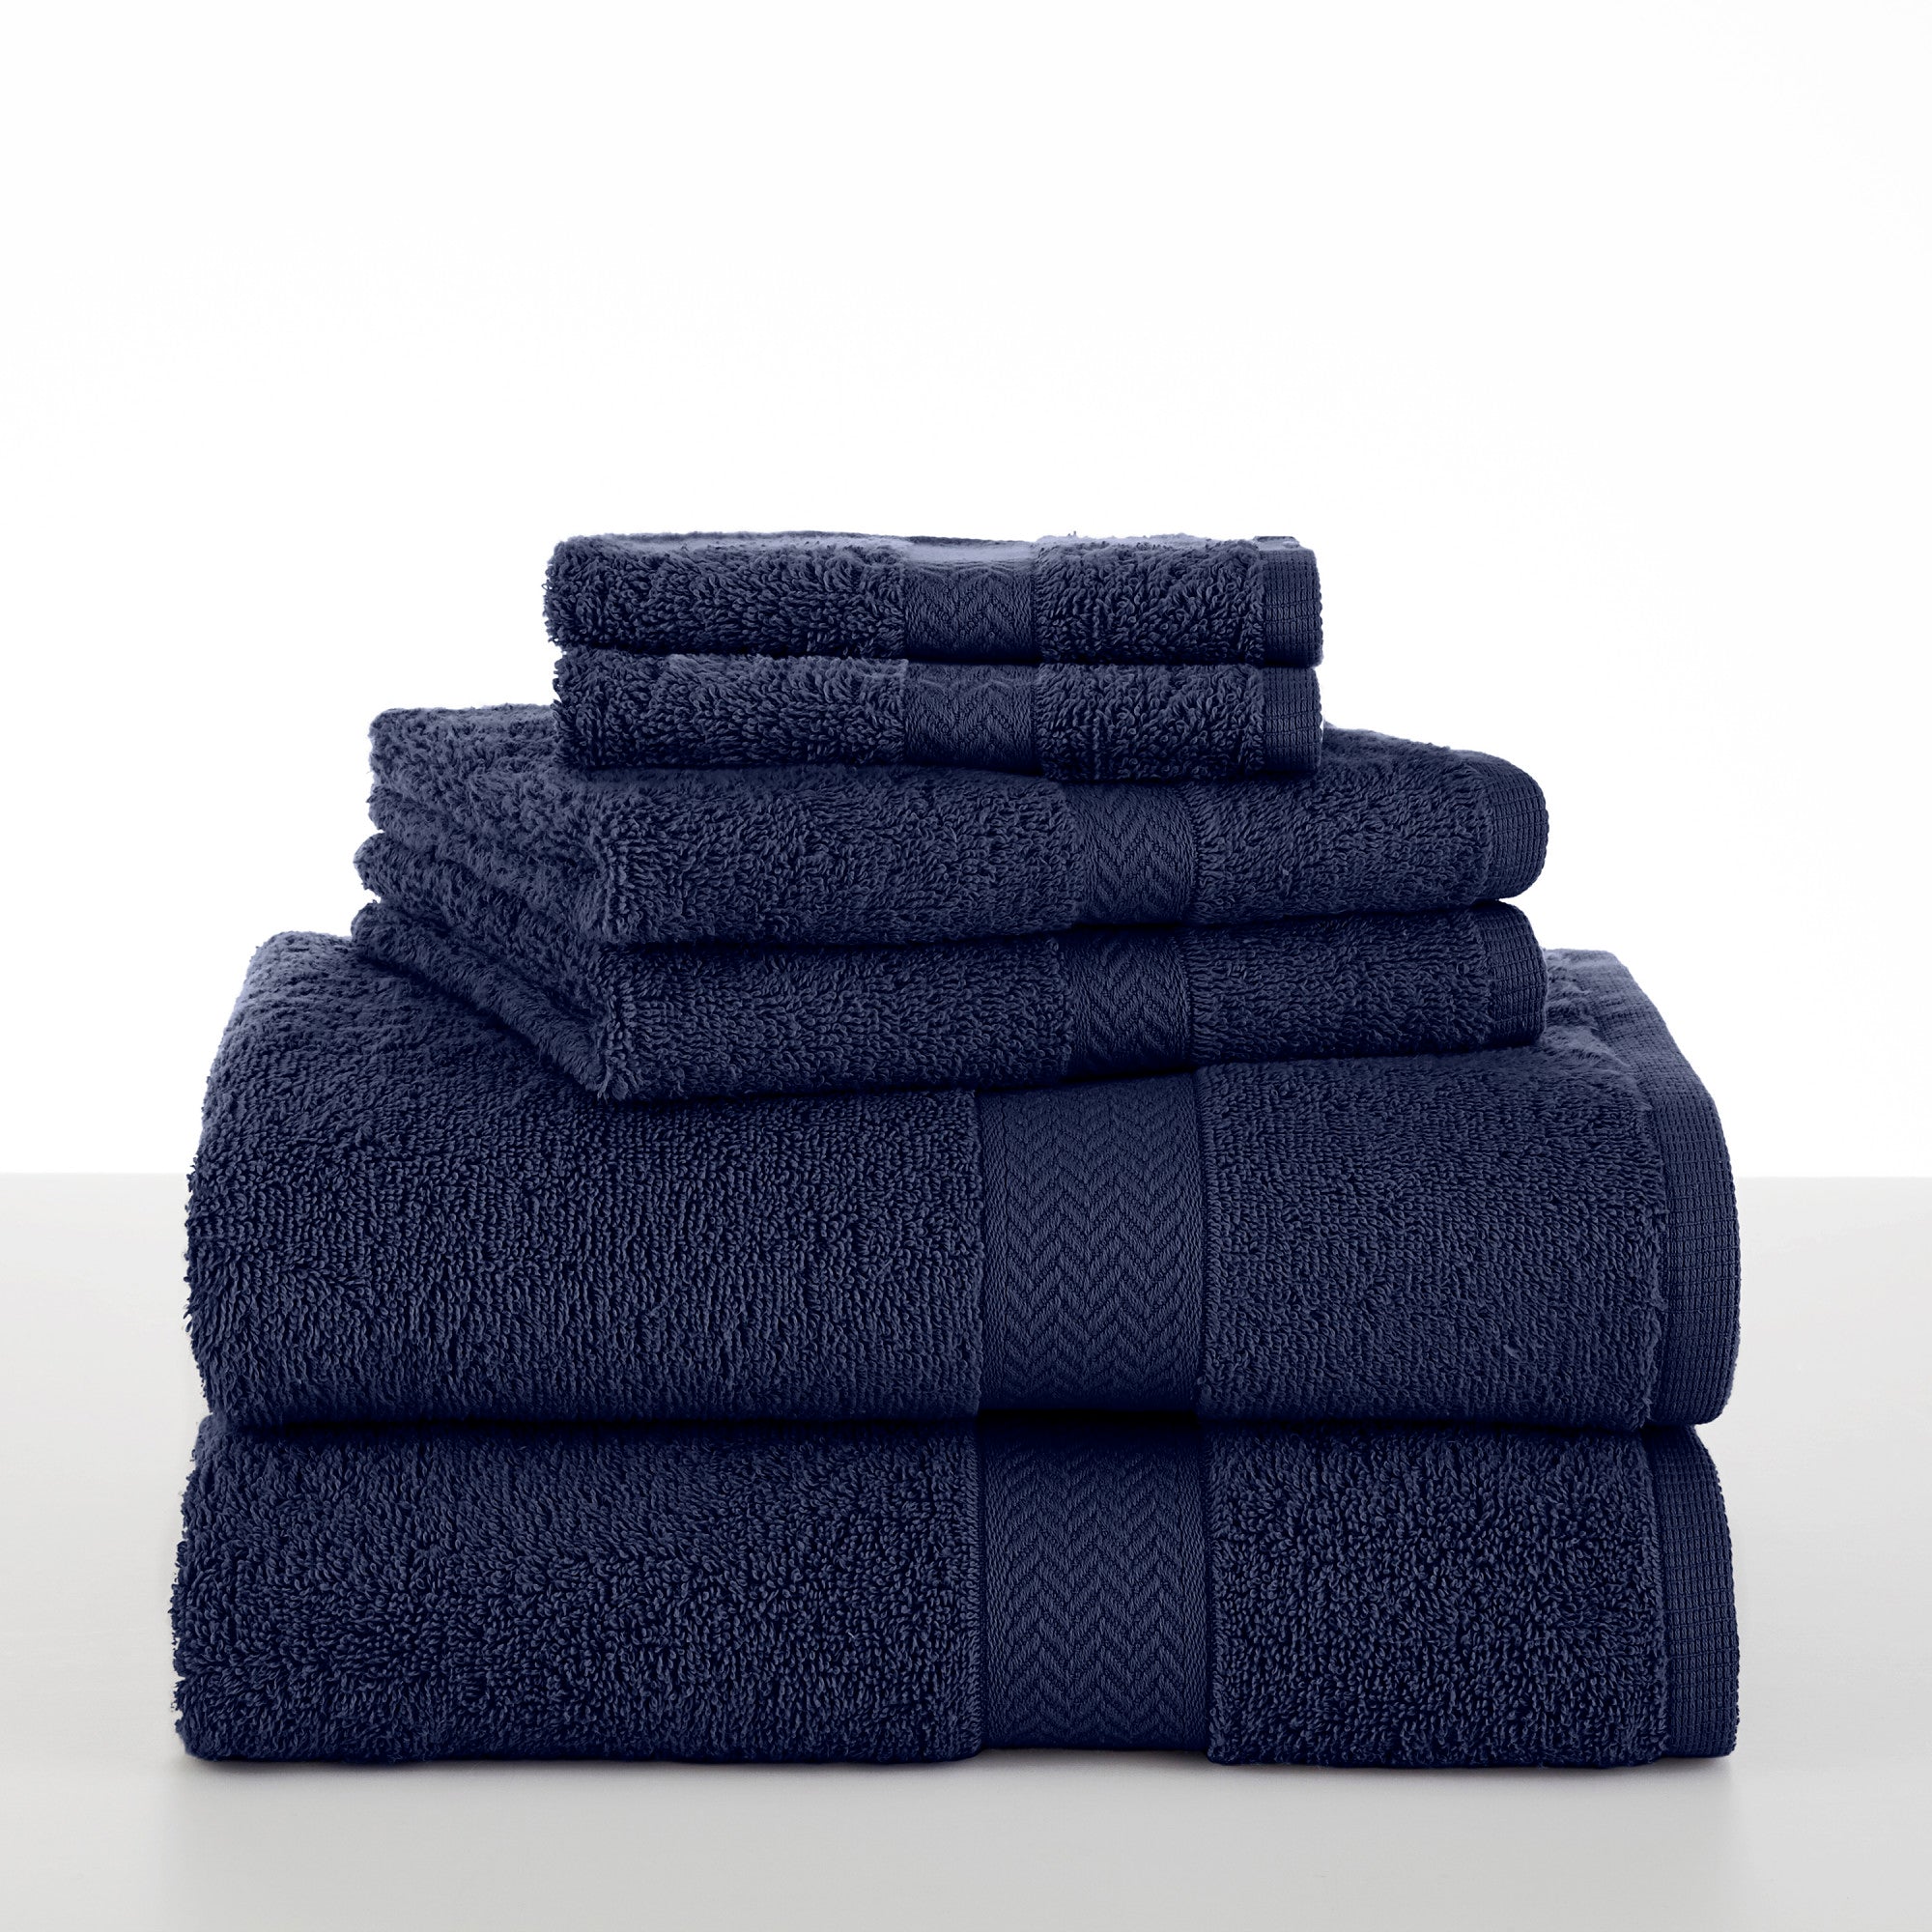 10 Piece Towel Set, 100% Cotton, Super Soft Fluffy and Plush, Quick Dry  Highly Absorbent Bathroom Shower Spa Quality Towel Set - Denim (2 Bath  Towels, 4 Hand Towels, 4 Washcloths) : Amazon.in: Home & Kitchen